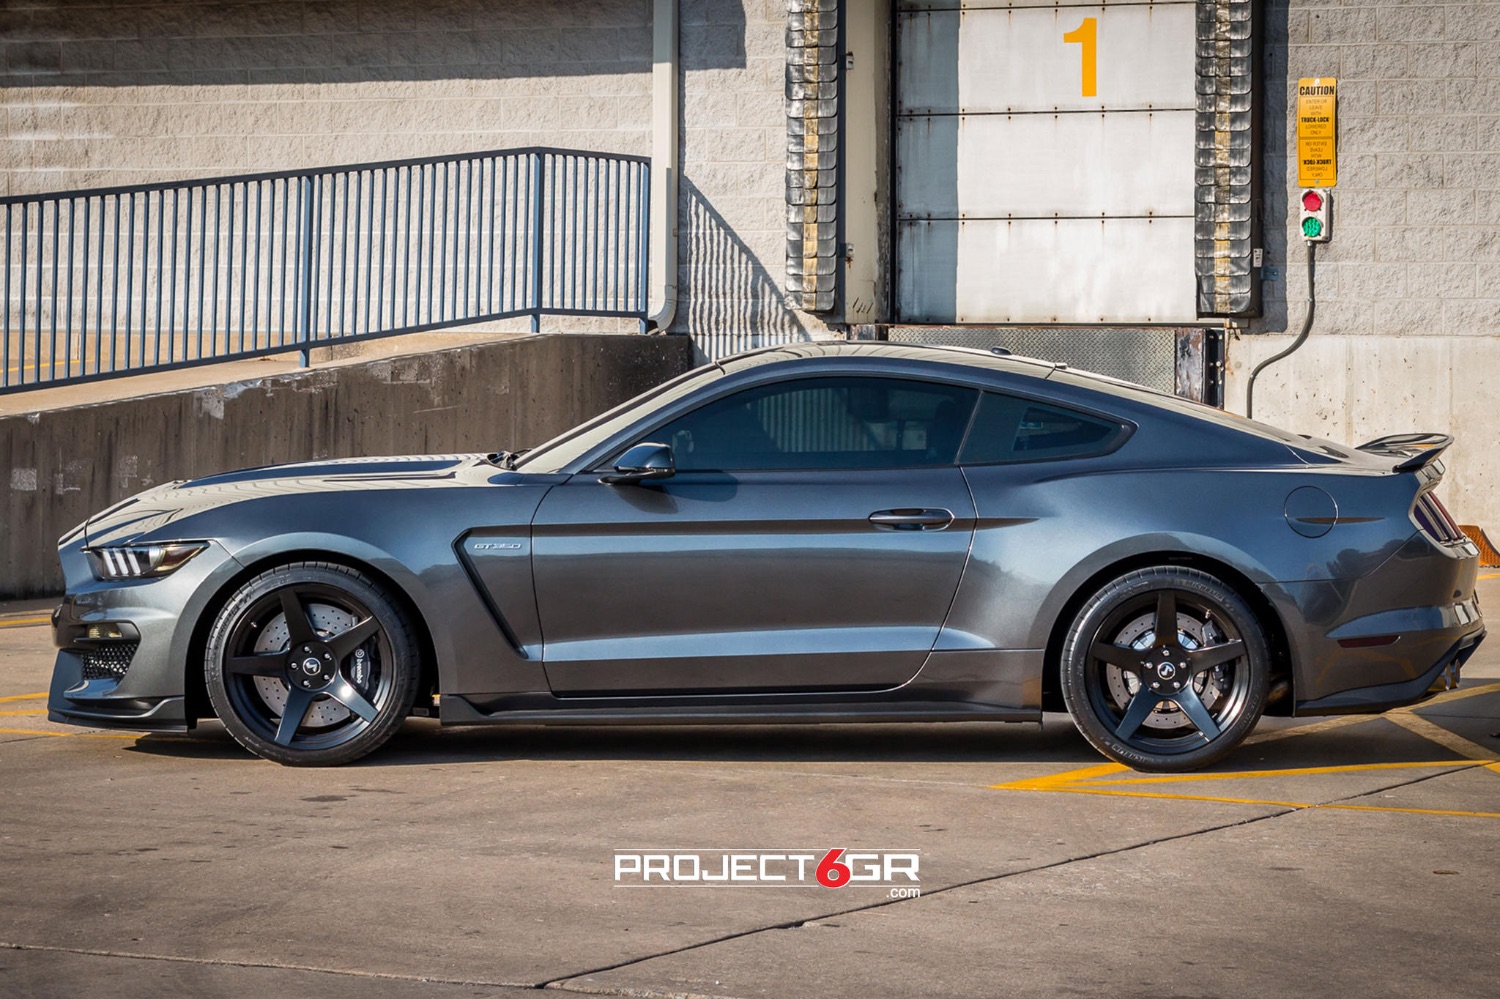 project-6gr-5-spoke-ford-shelby-gt350-satin-black-mustang-01